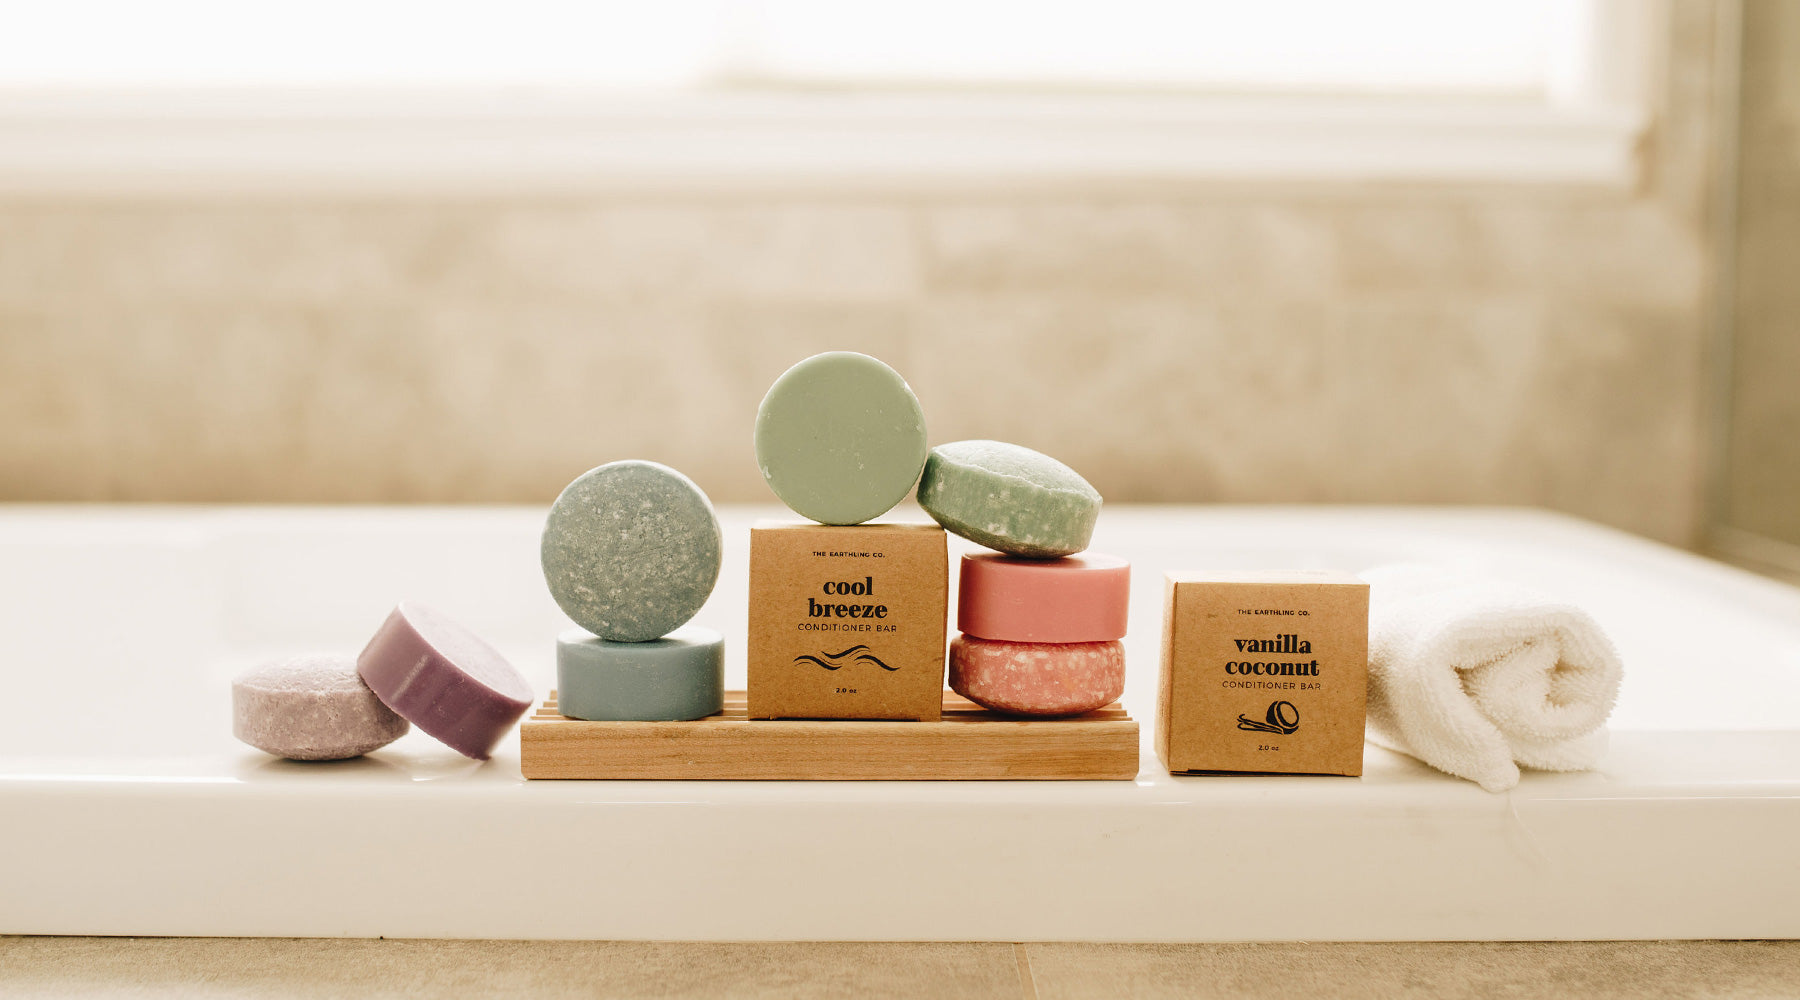 Shampoo & Conditioner bars for all hair types